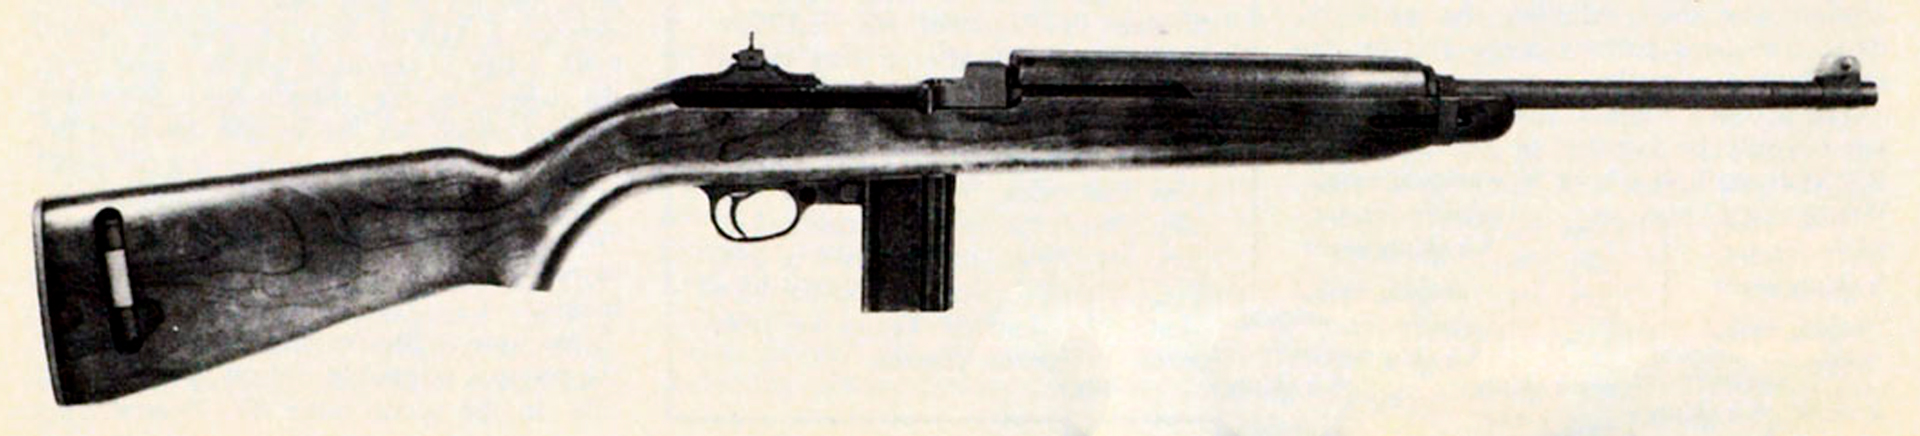 M1 Carbine right-side view